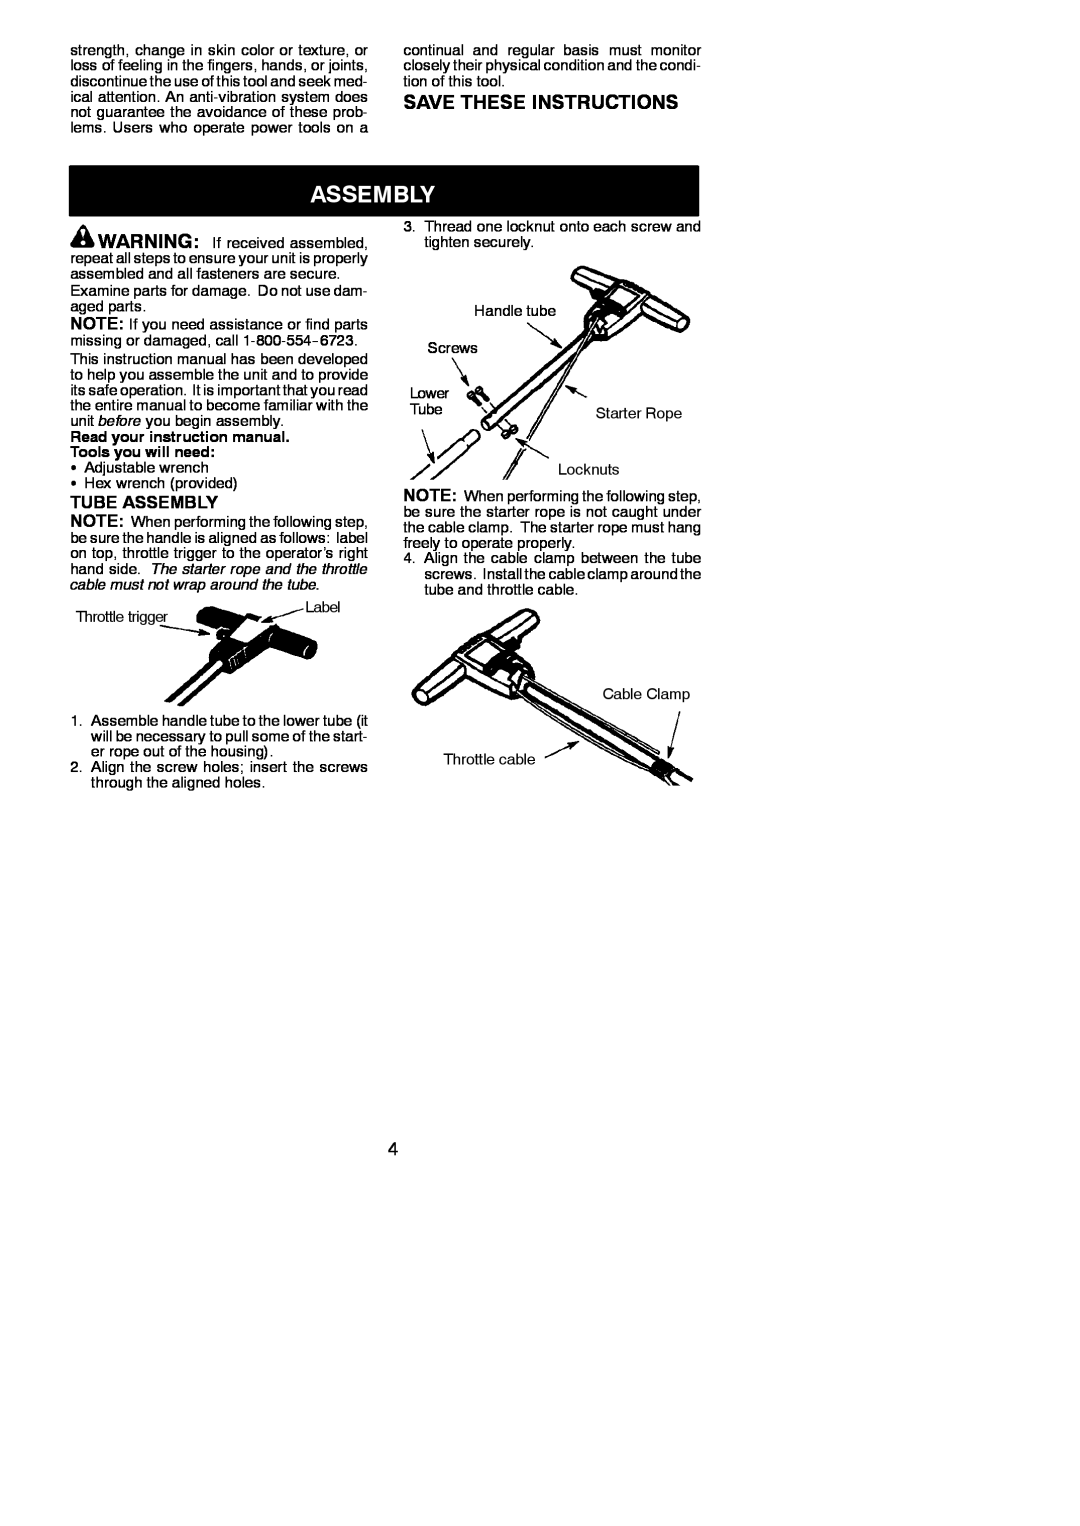 Weed Eater 545117552 instruction manual Save These Instructions, Tube Assembly 